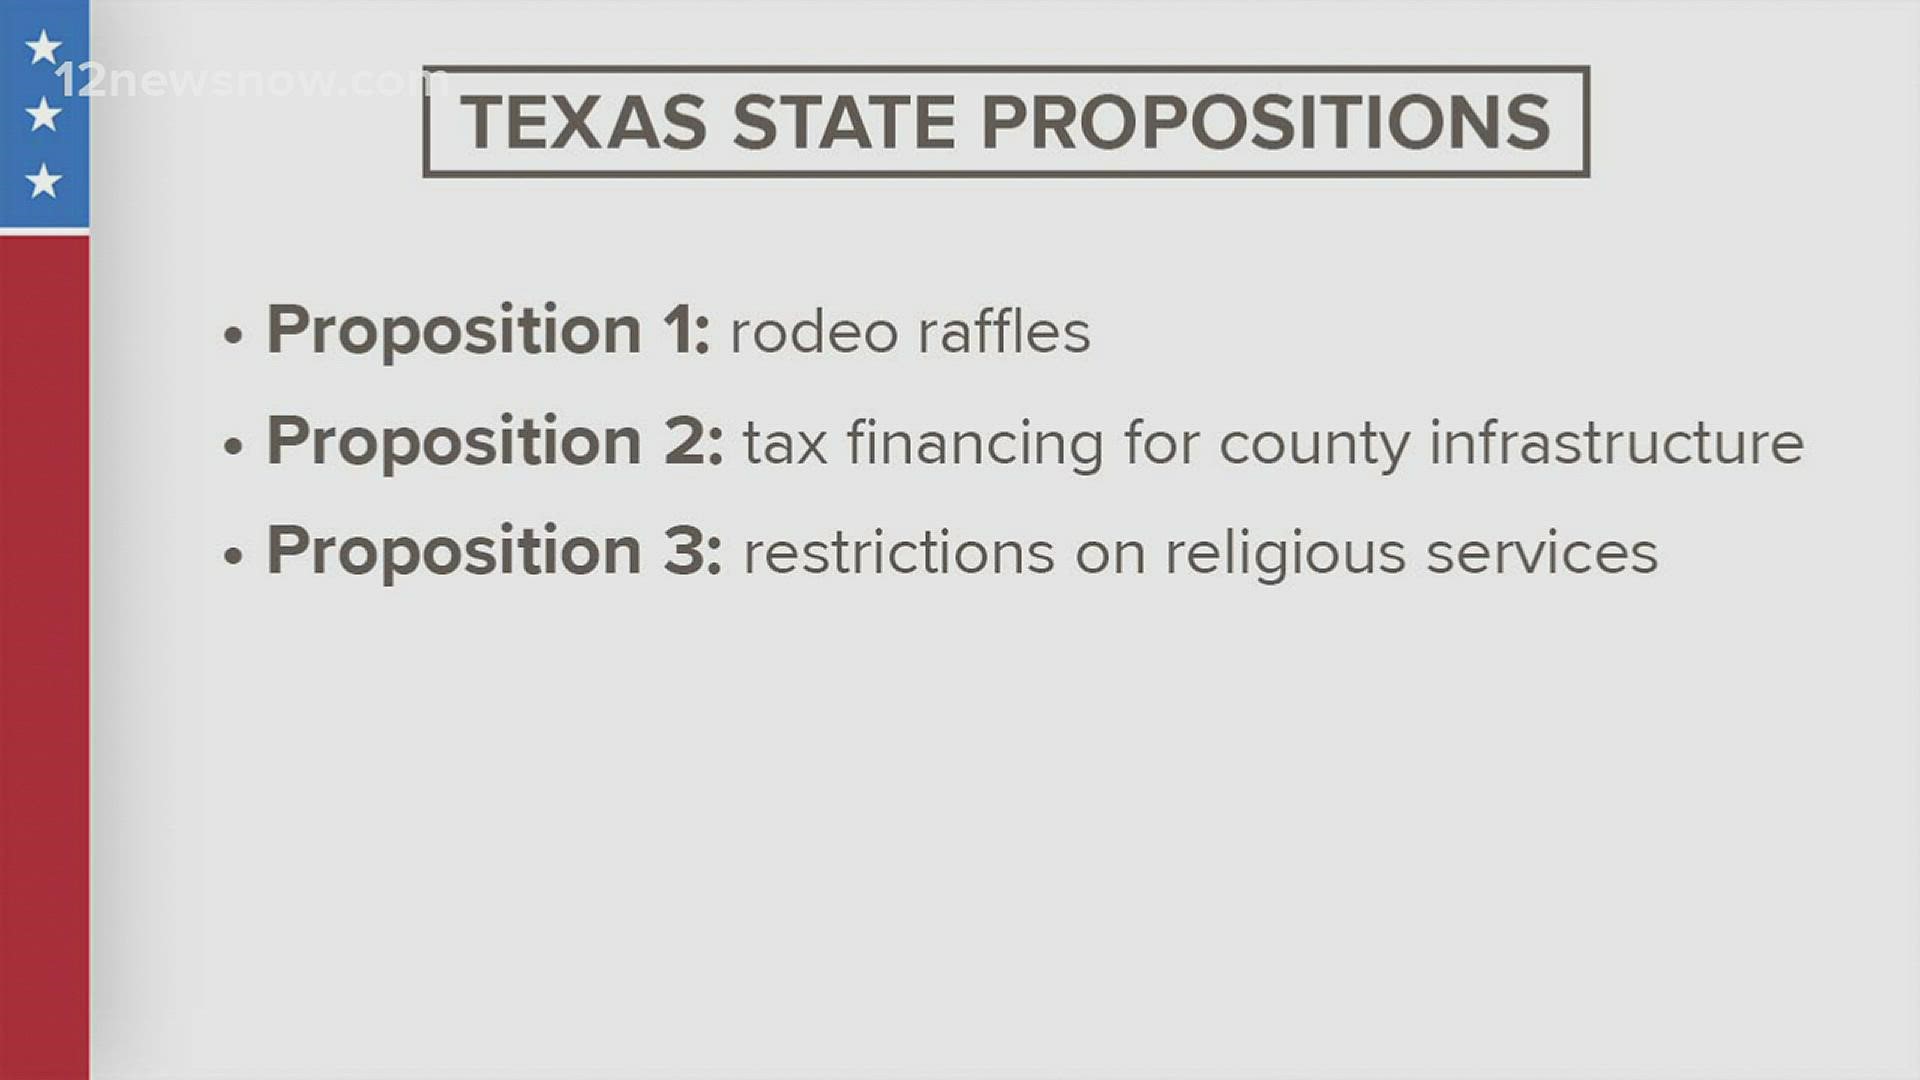 Proposition three, which is getting a large amount of attention, would ban the state from prohibiting or limiting religious services.